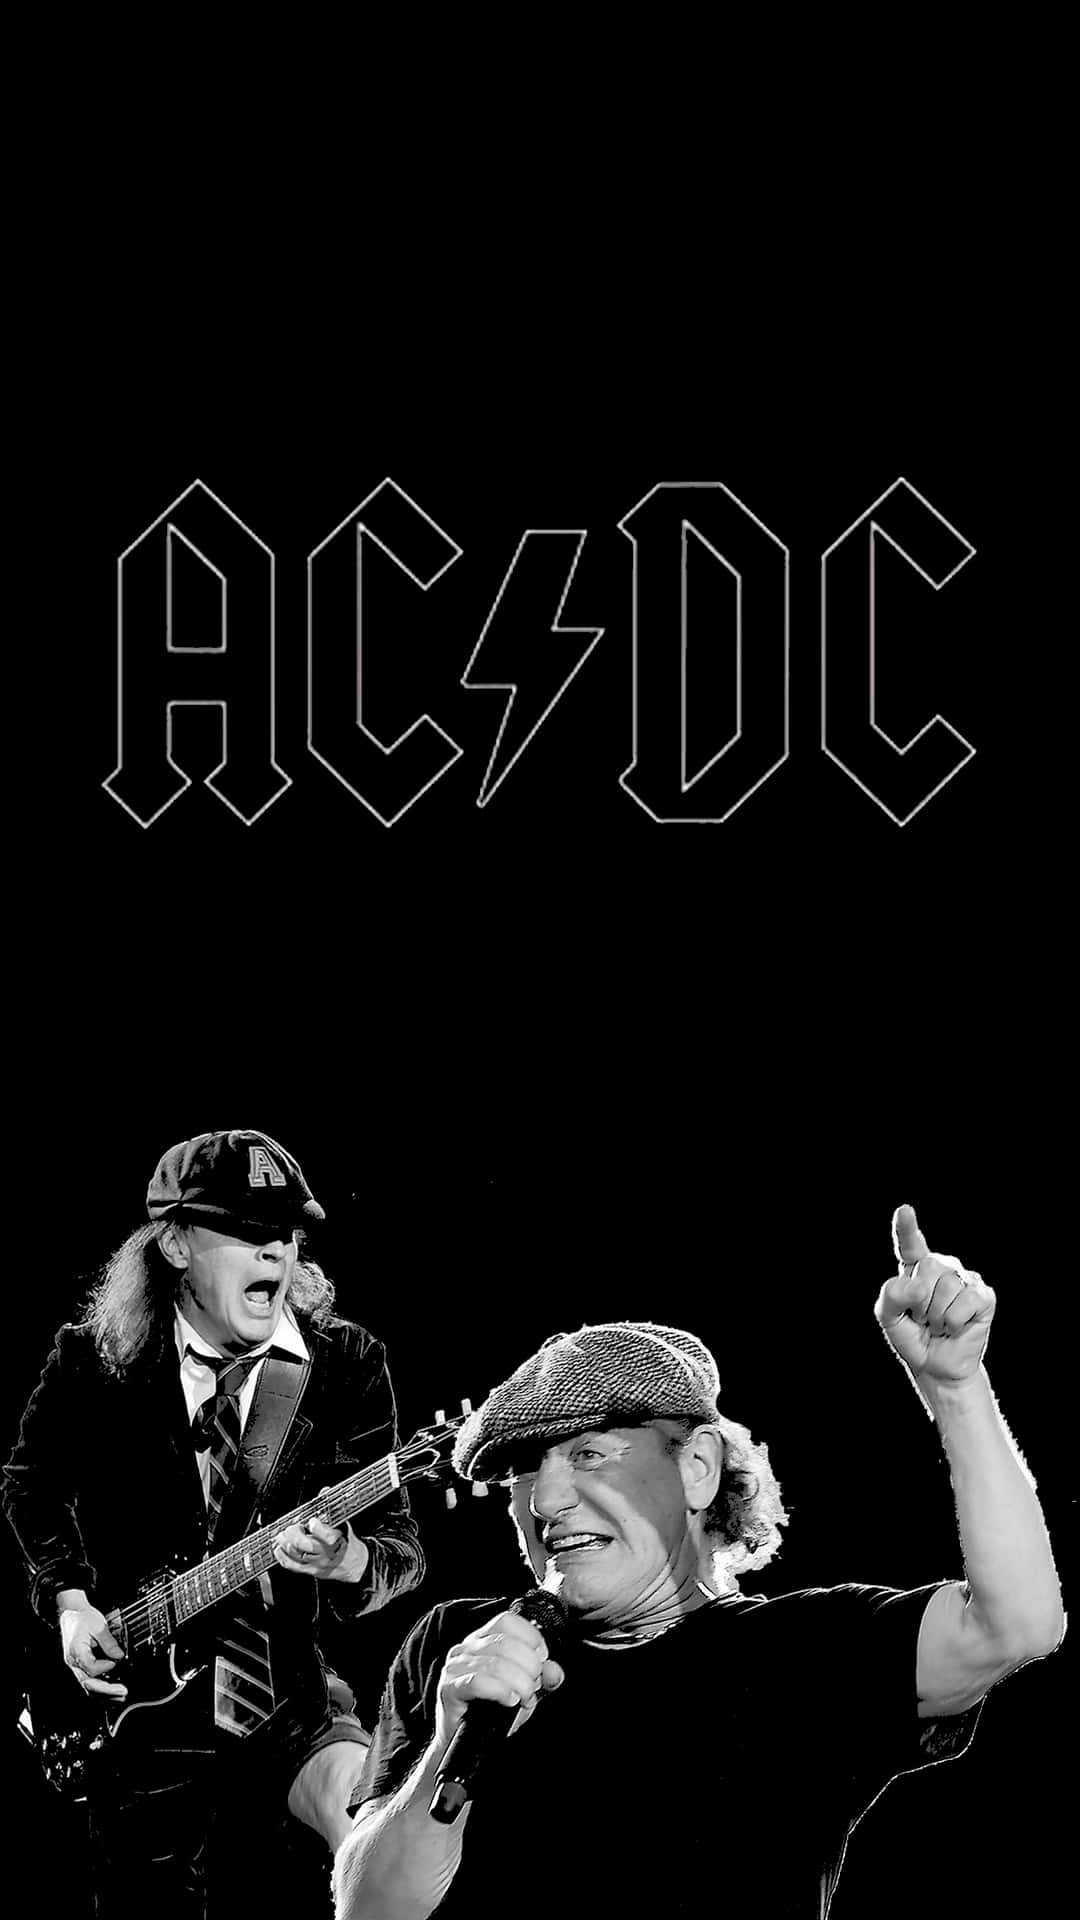 Cool ACDC Wallpaper 63 images